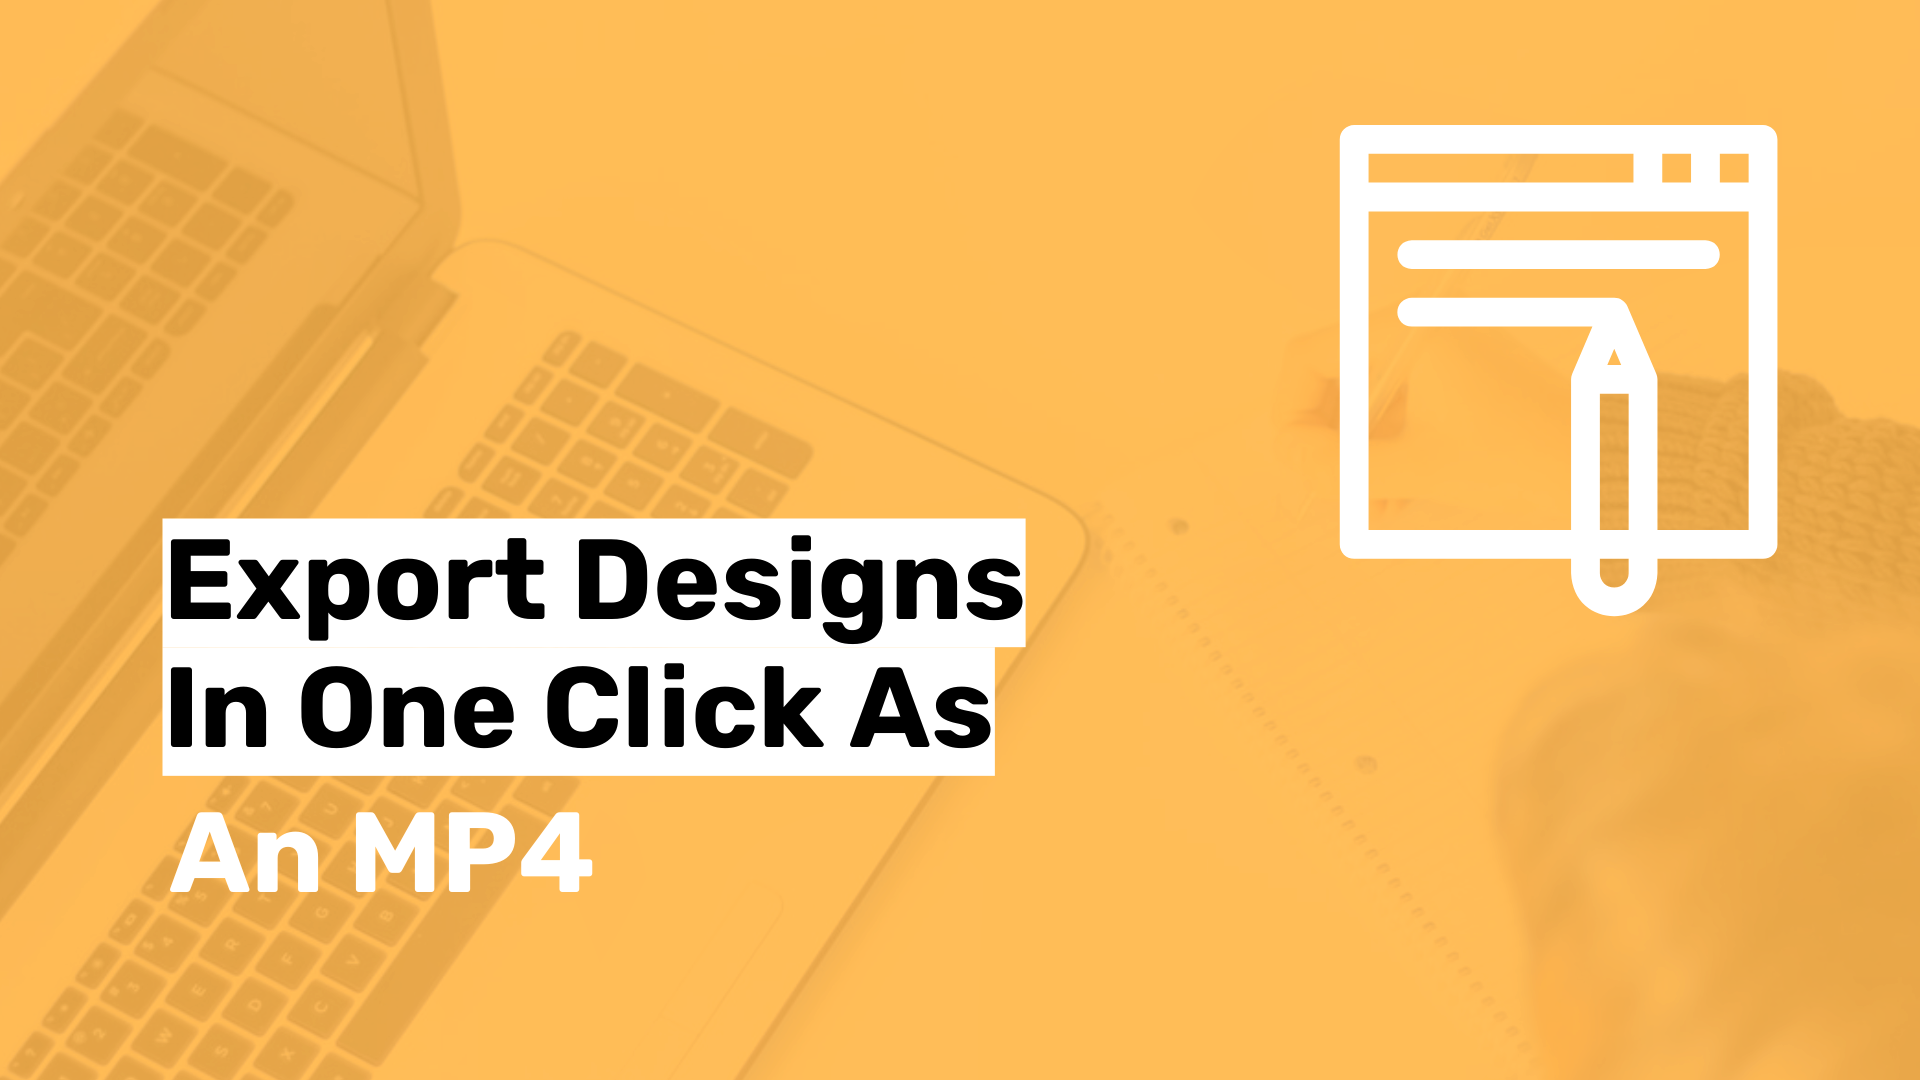 Export Designs in One Click as an MP4